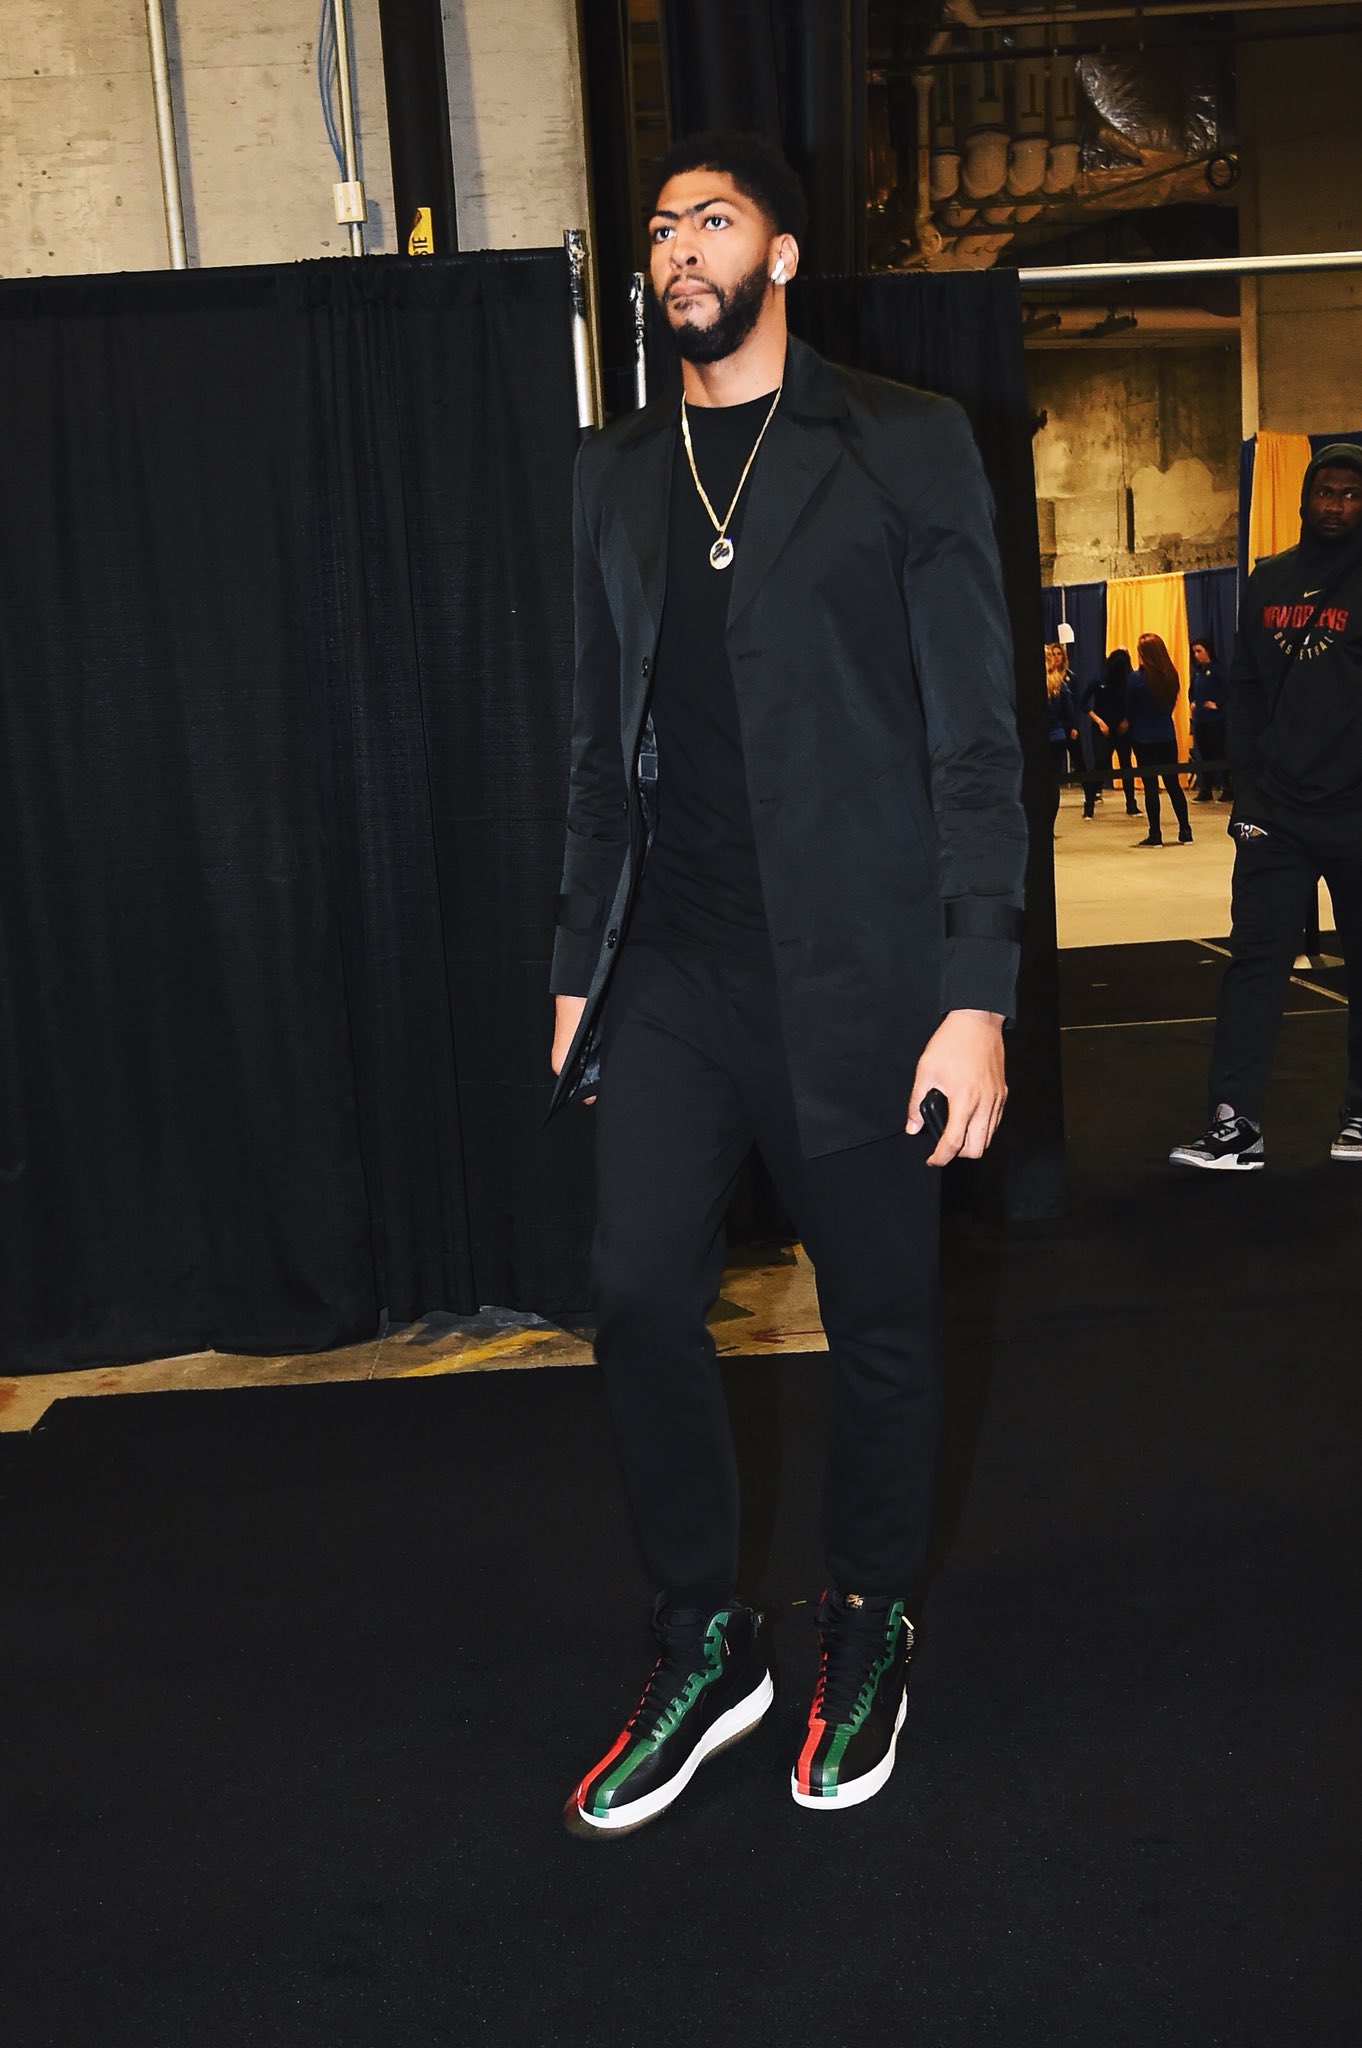 B/R Kicks on Twitter: ".@AntDavis23 in the Nike Air Force High “ BHM” for Game 2 against Golden State / Twitter